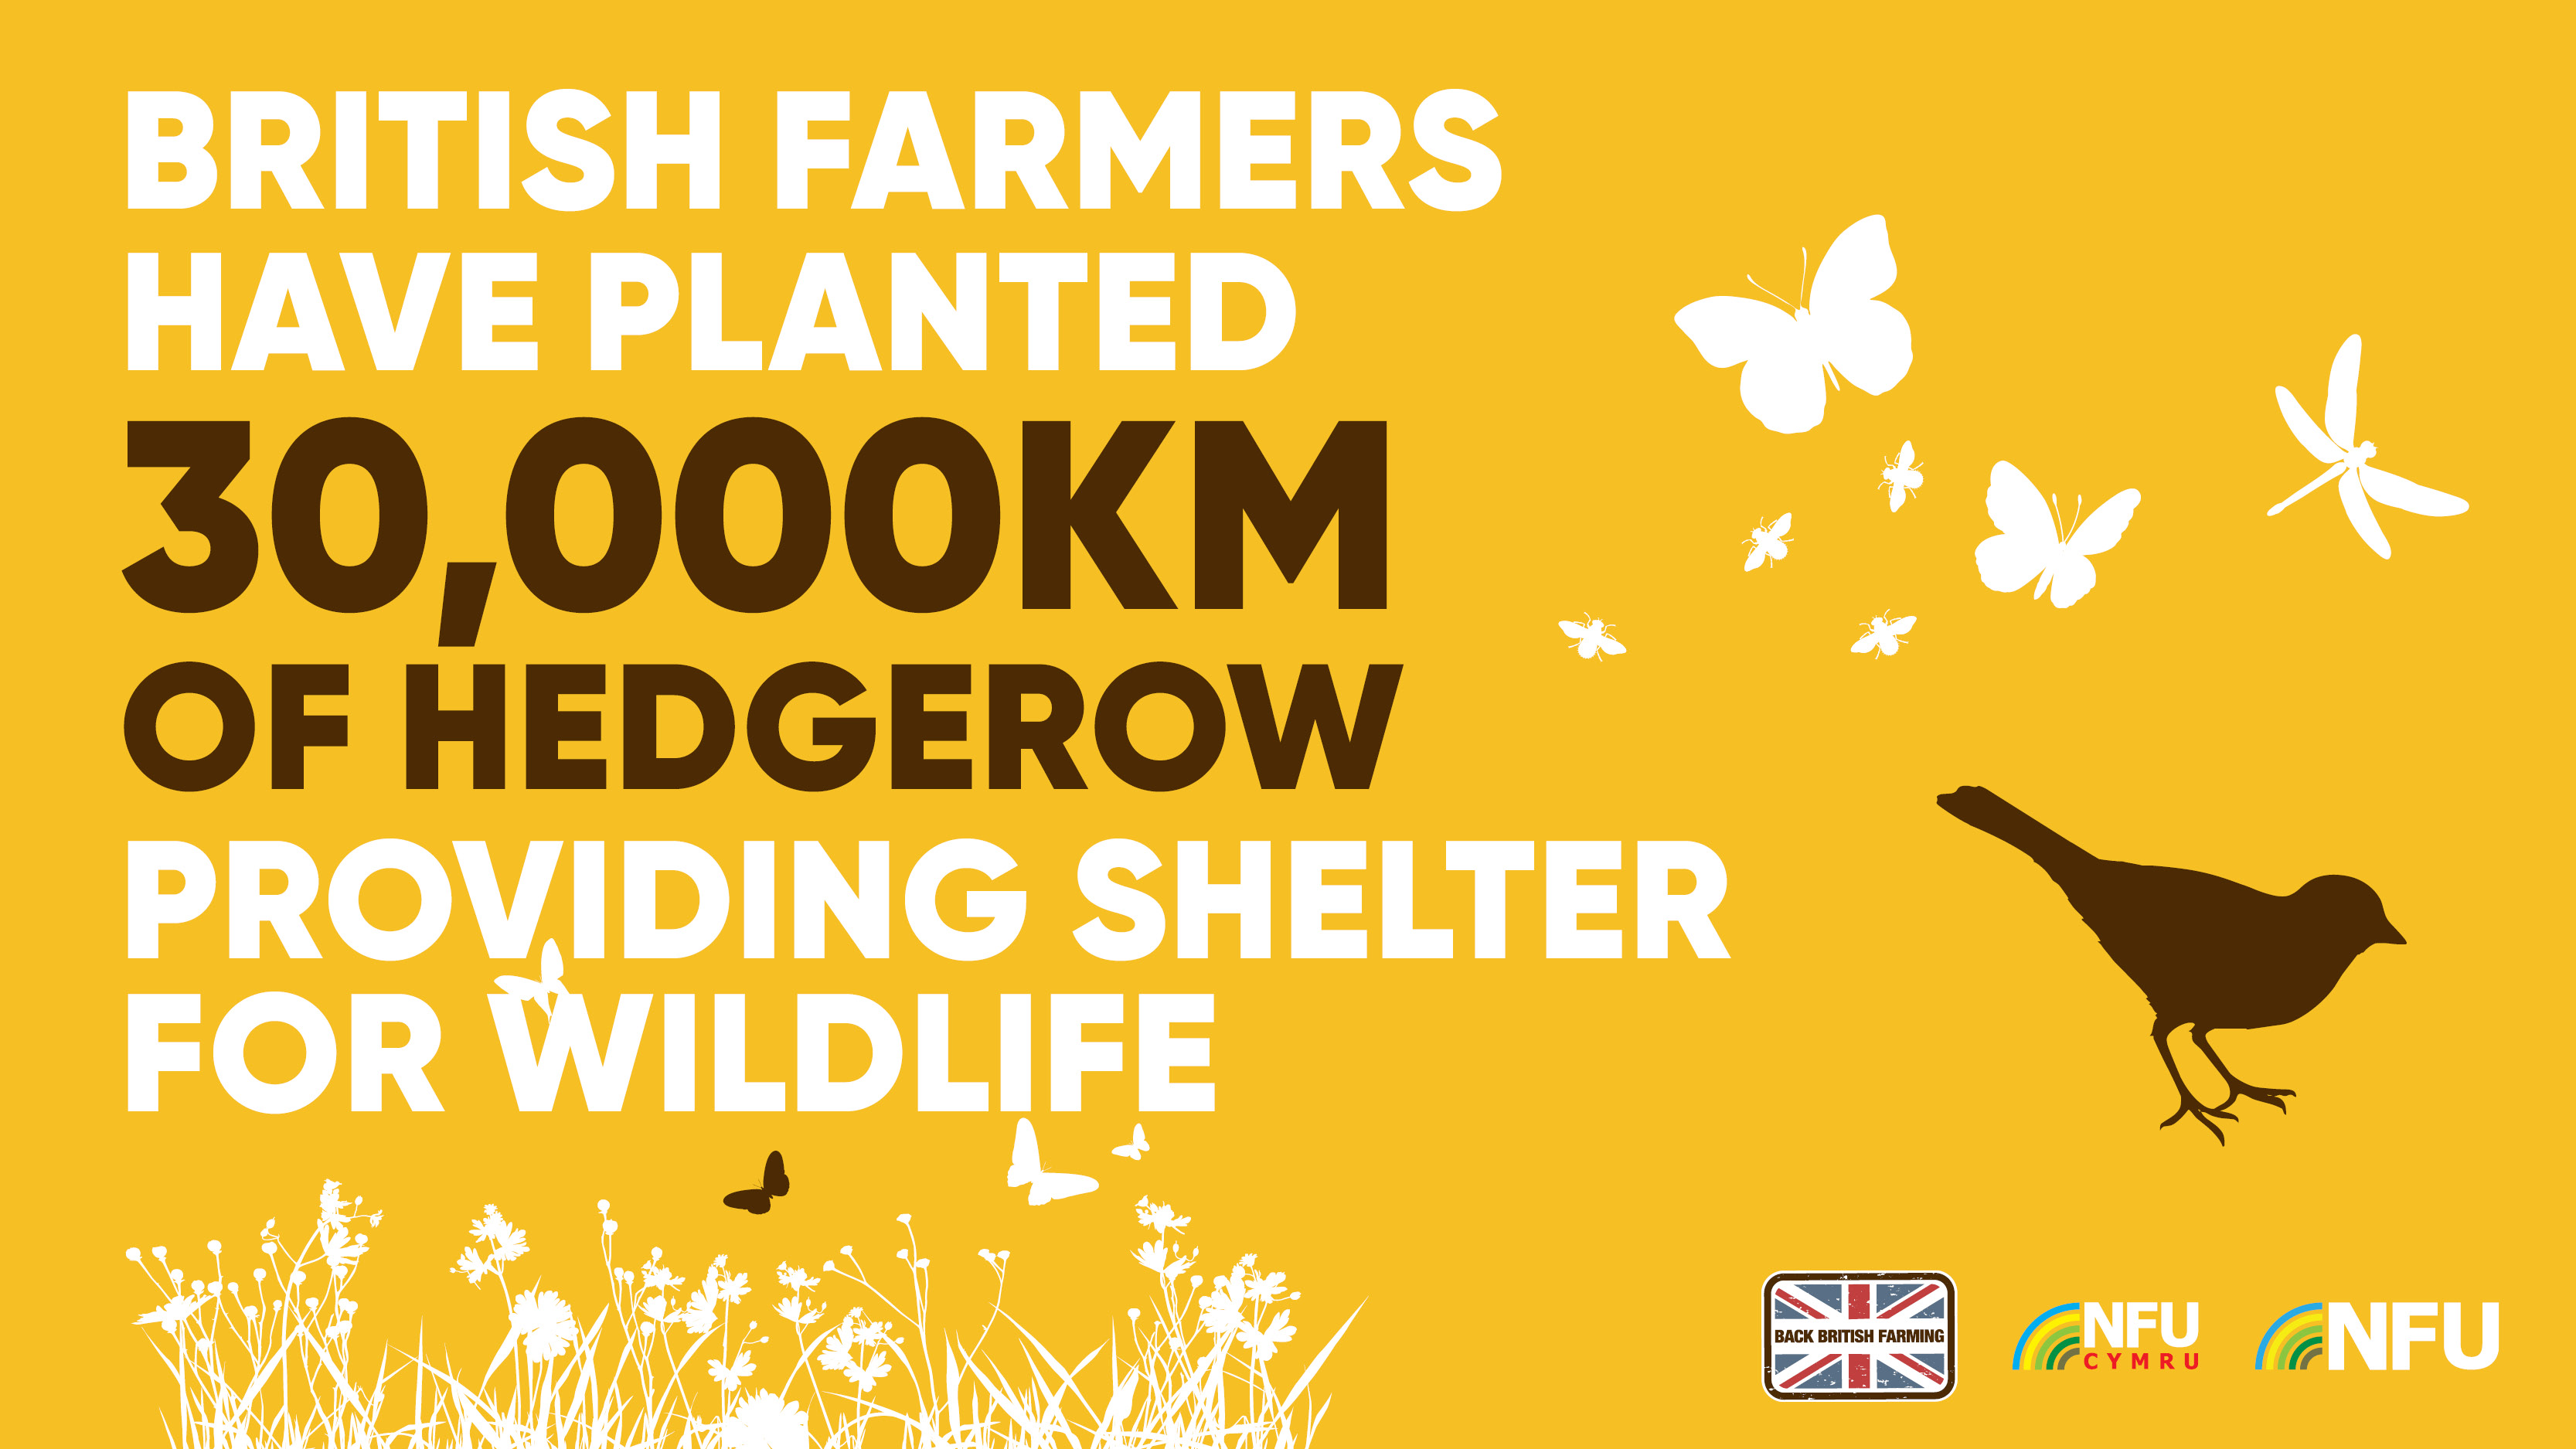 British farmers have planted 30,000km of hedgerow providing shelter for wildlife